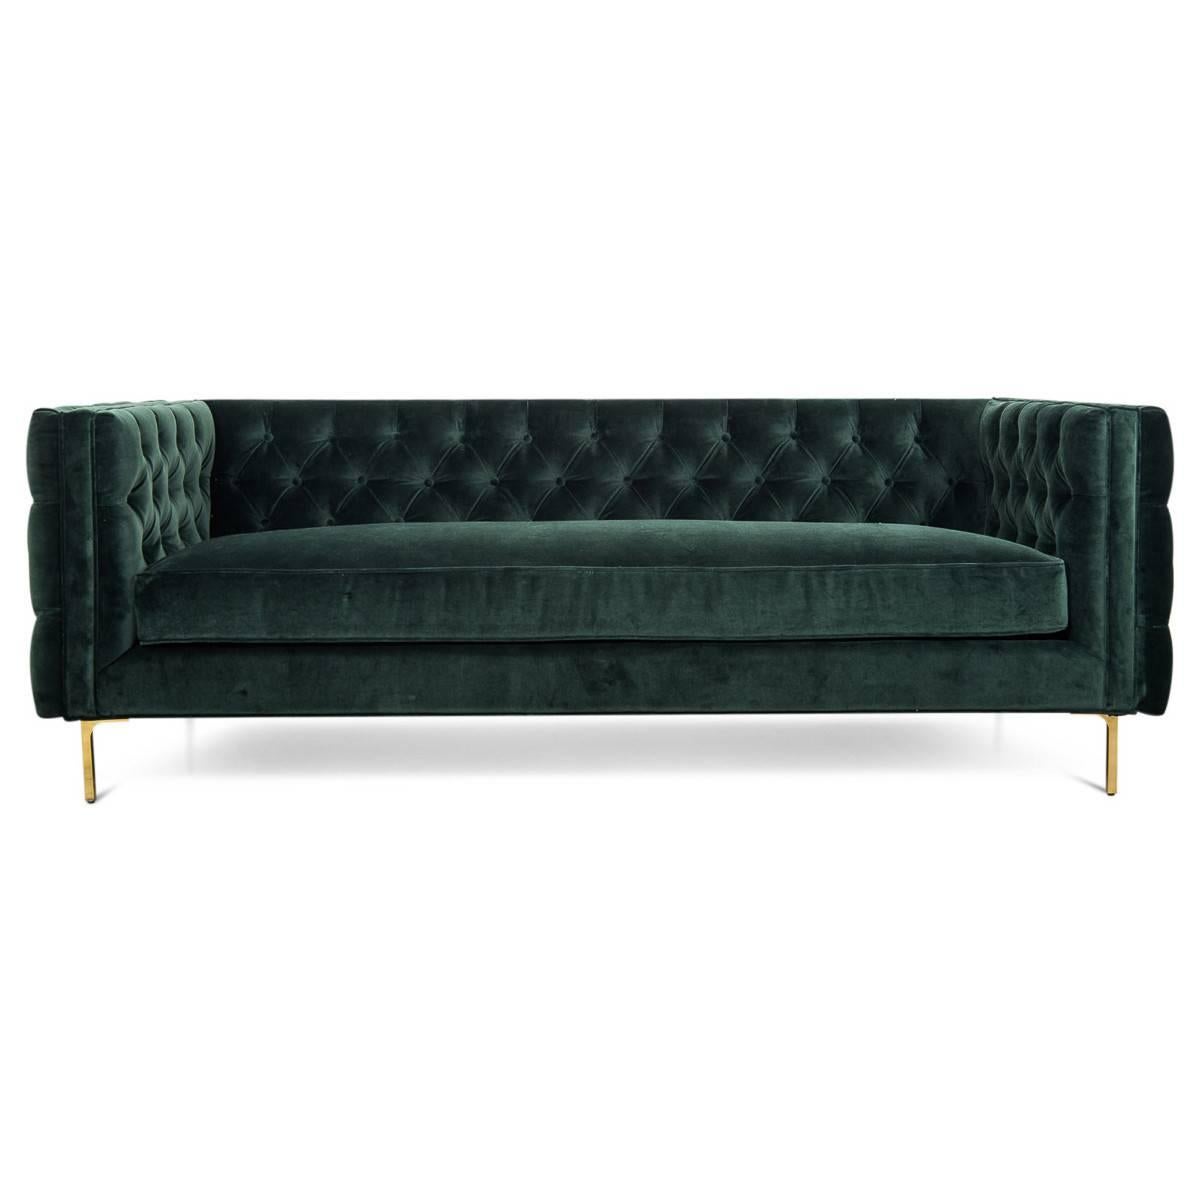 Our 007 inside out sofa in hunter velvet offers detailing both inside and out. Featuring tufted hunter velvet, a down filled single seat cushion, and our 7